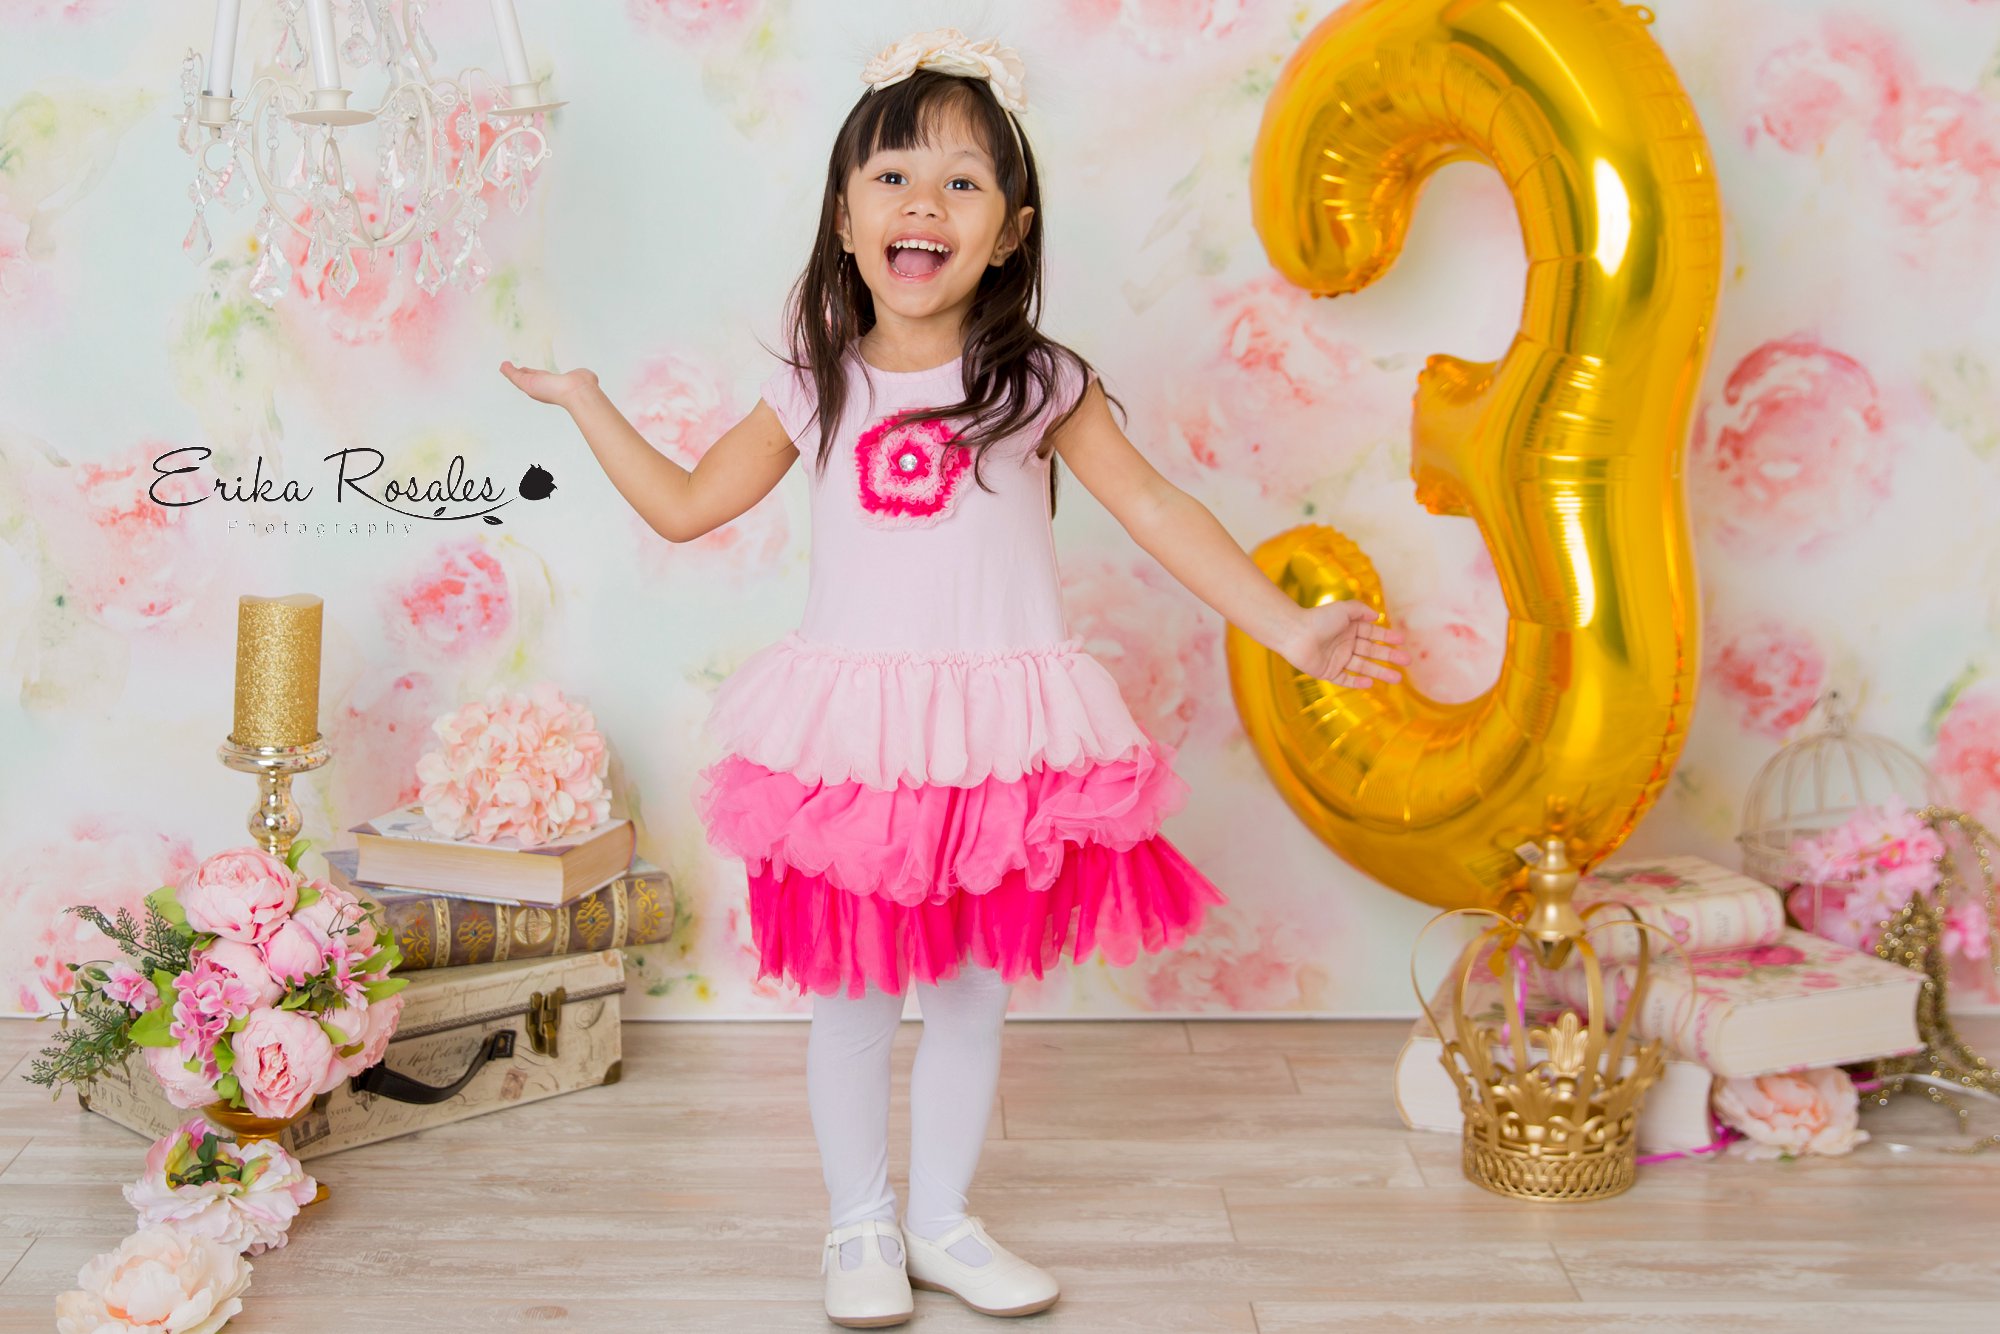 3 Years Old Baby Girl Development: What to Expect